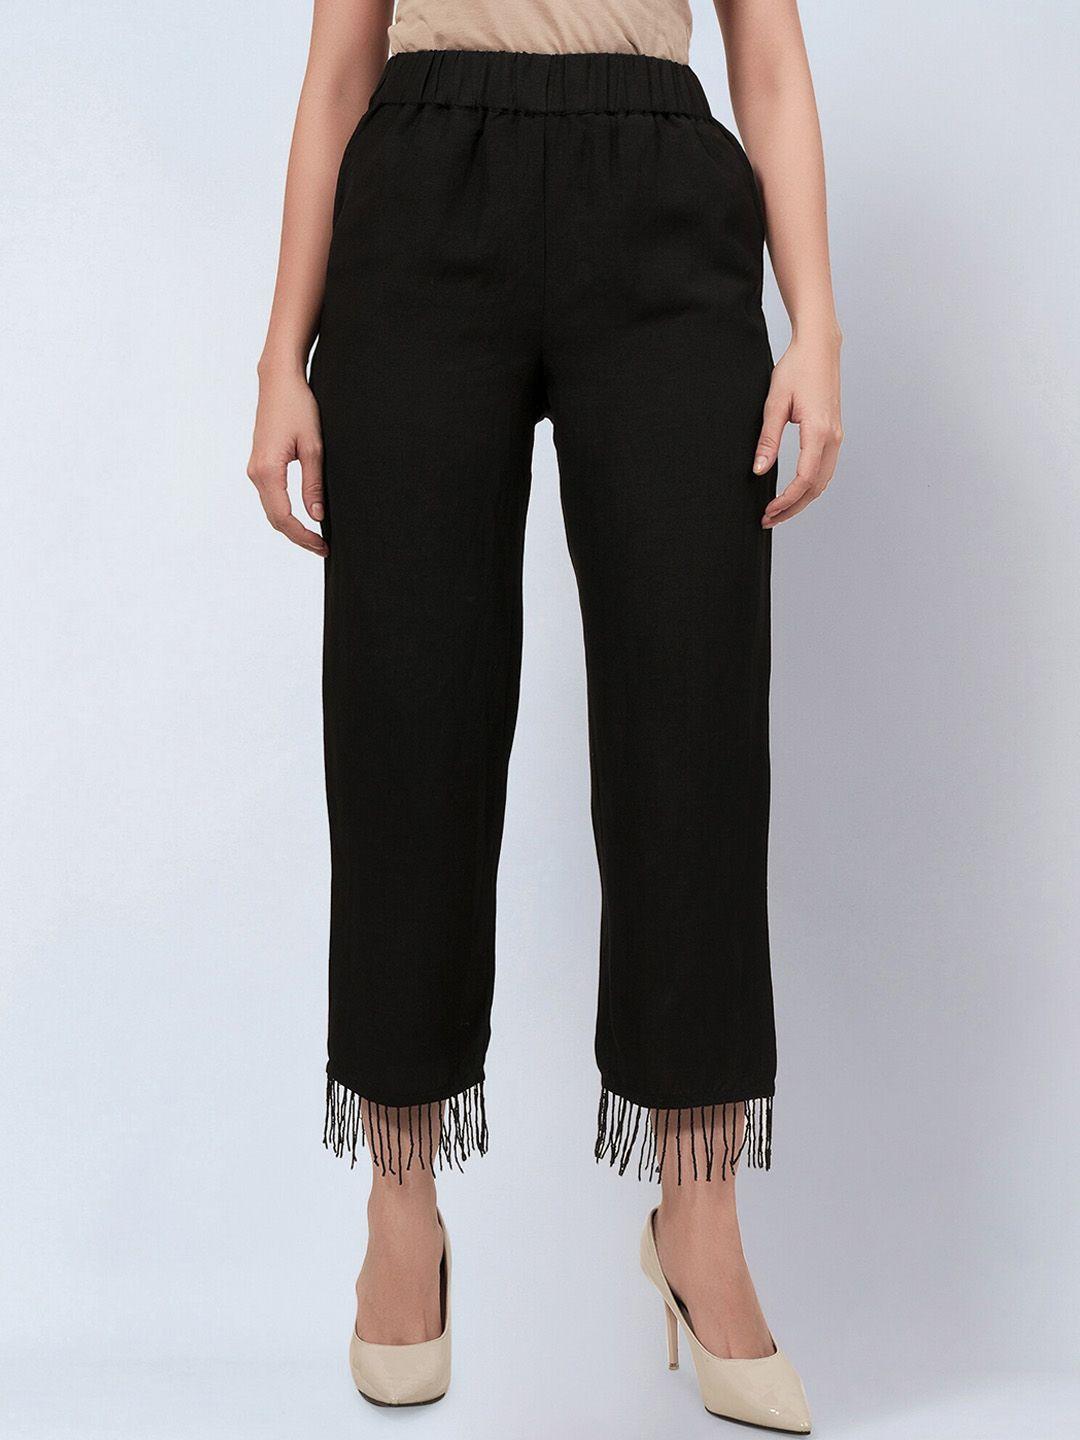 first-resort-by-ramola-bachchan-women-smart-mid-rise-linen-trousers